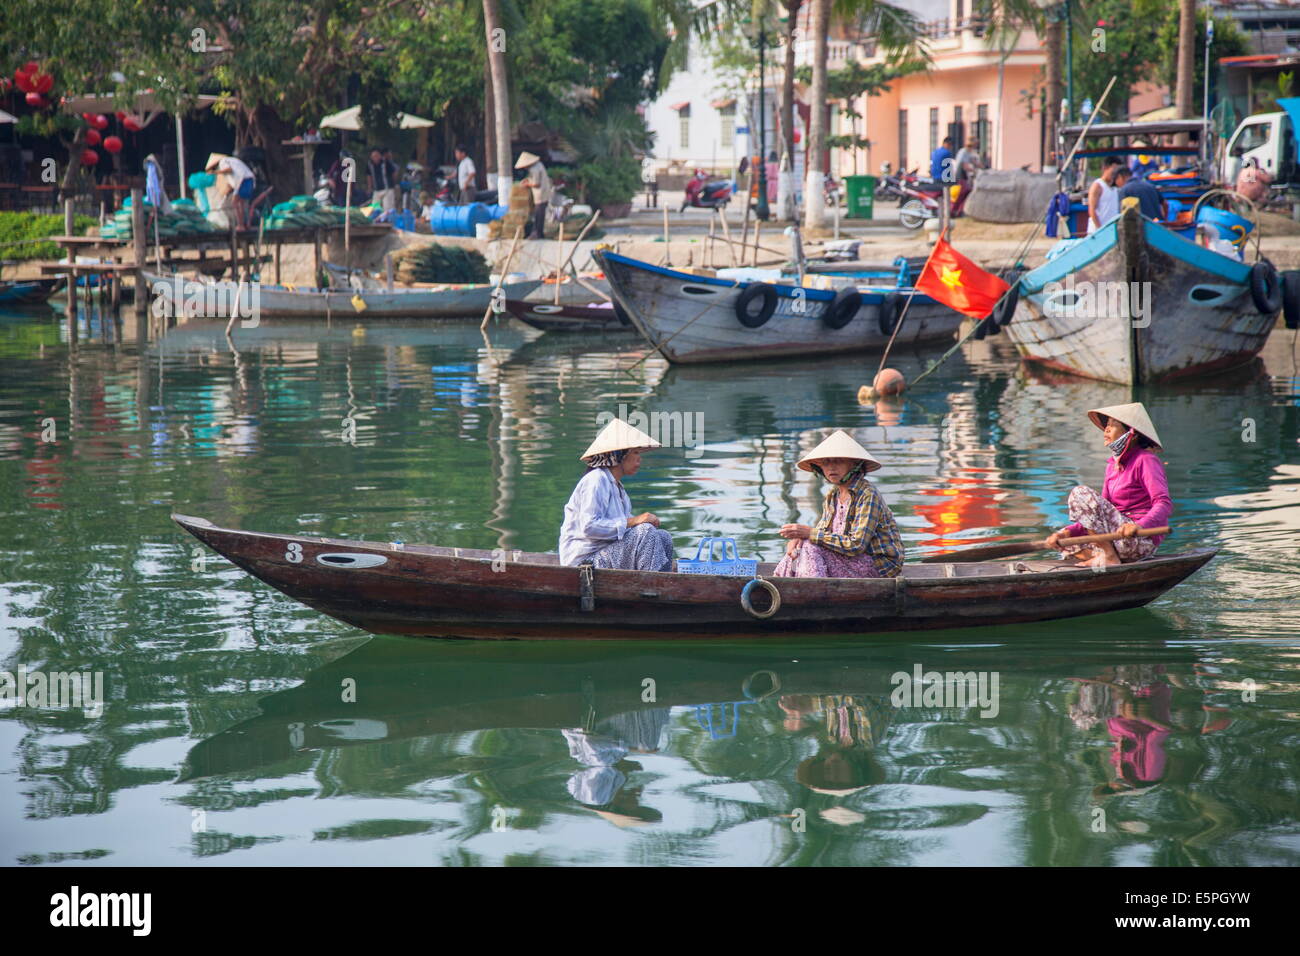 Women in rowing boat, Hoi An, UNESCO World Heritage Site, Quang Nam, Vietnam, Indochina, Southeast Asia, Asia Stock Photo